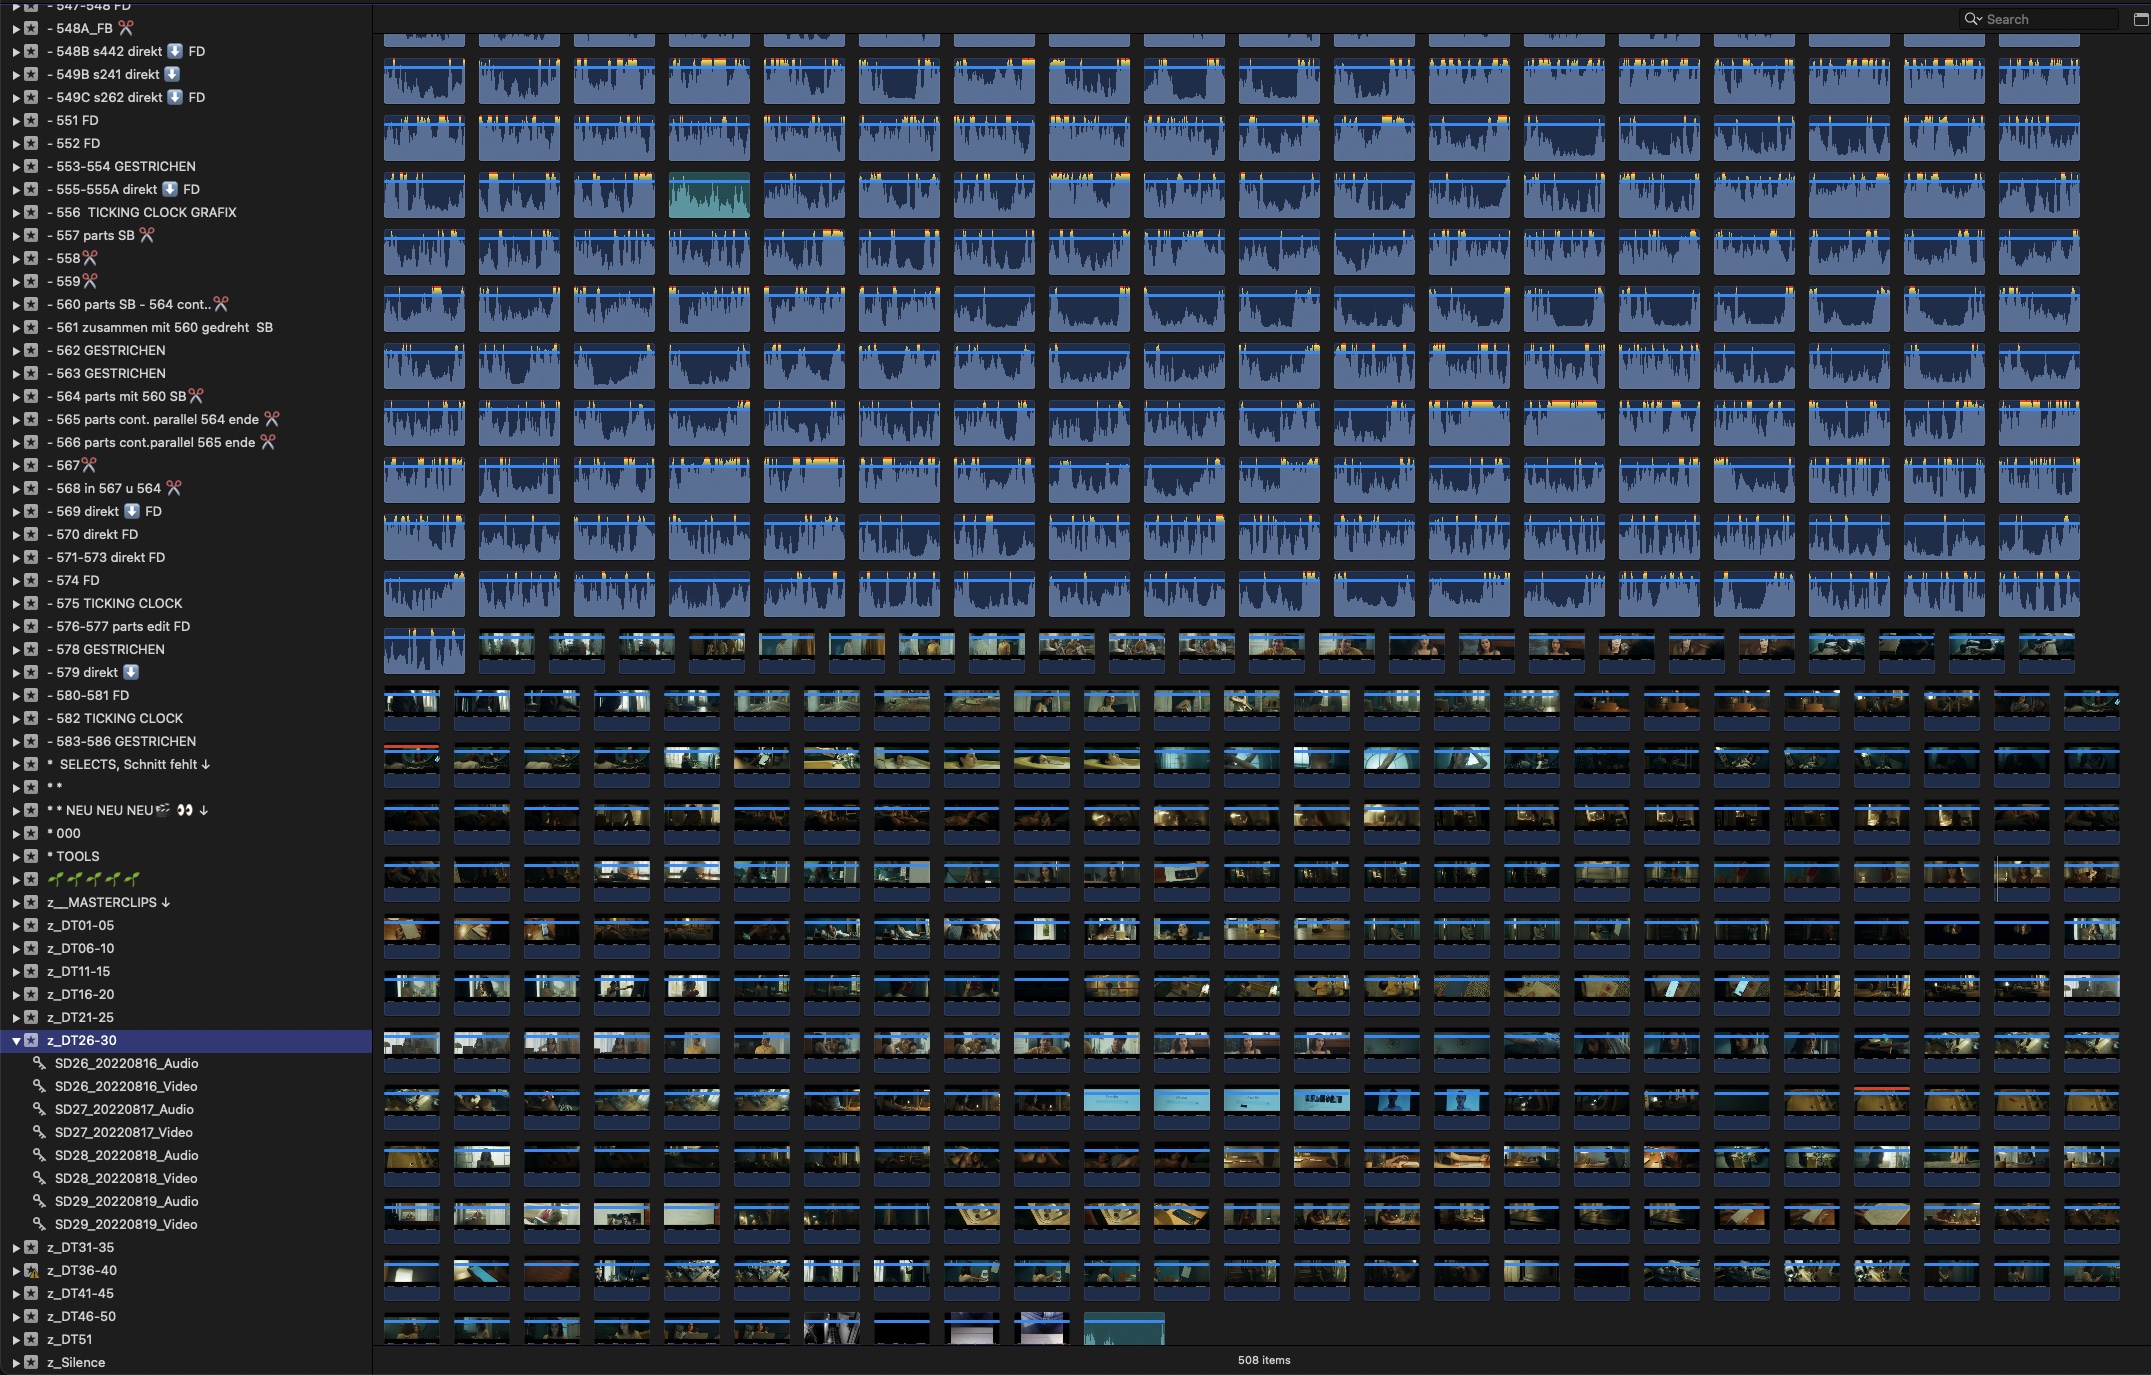 Screenshot of an Event, shooting day 26 to 30 with 508 clips in it